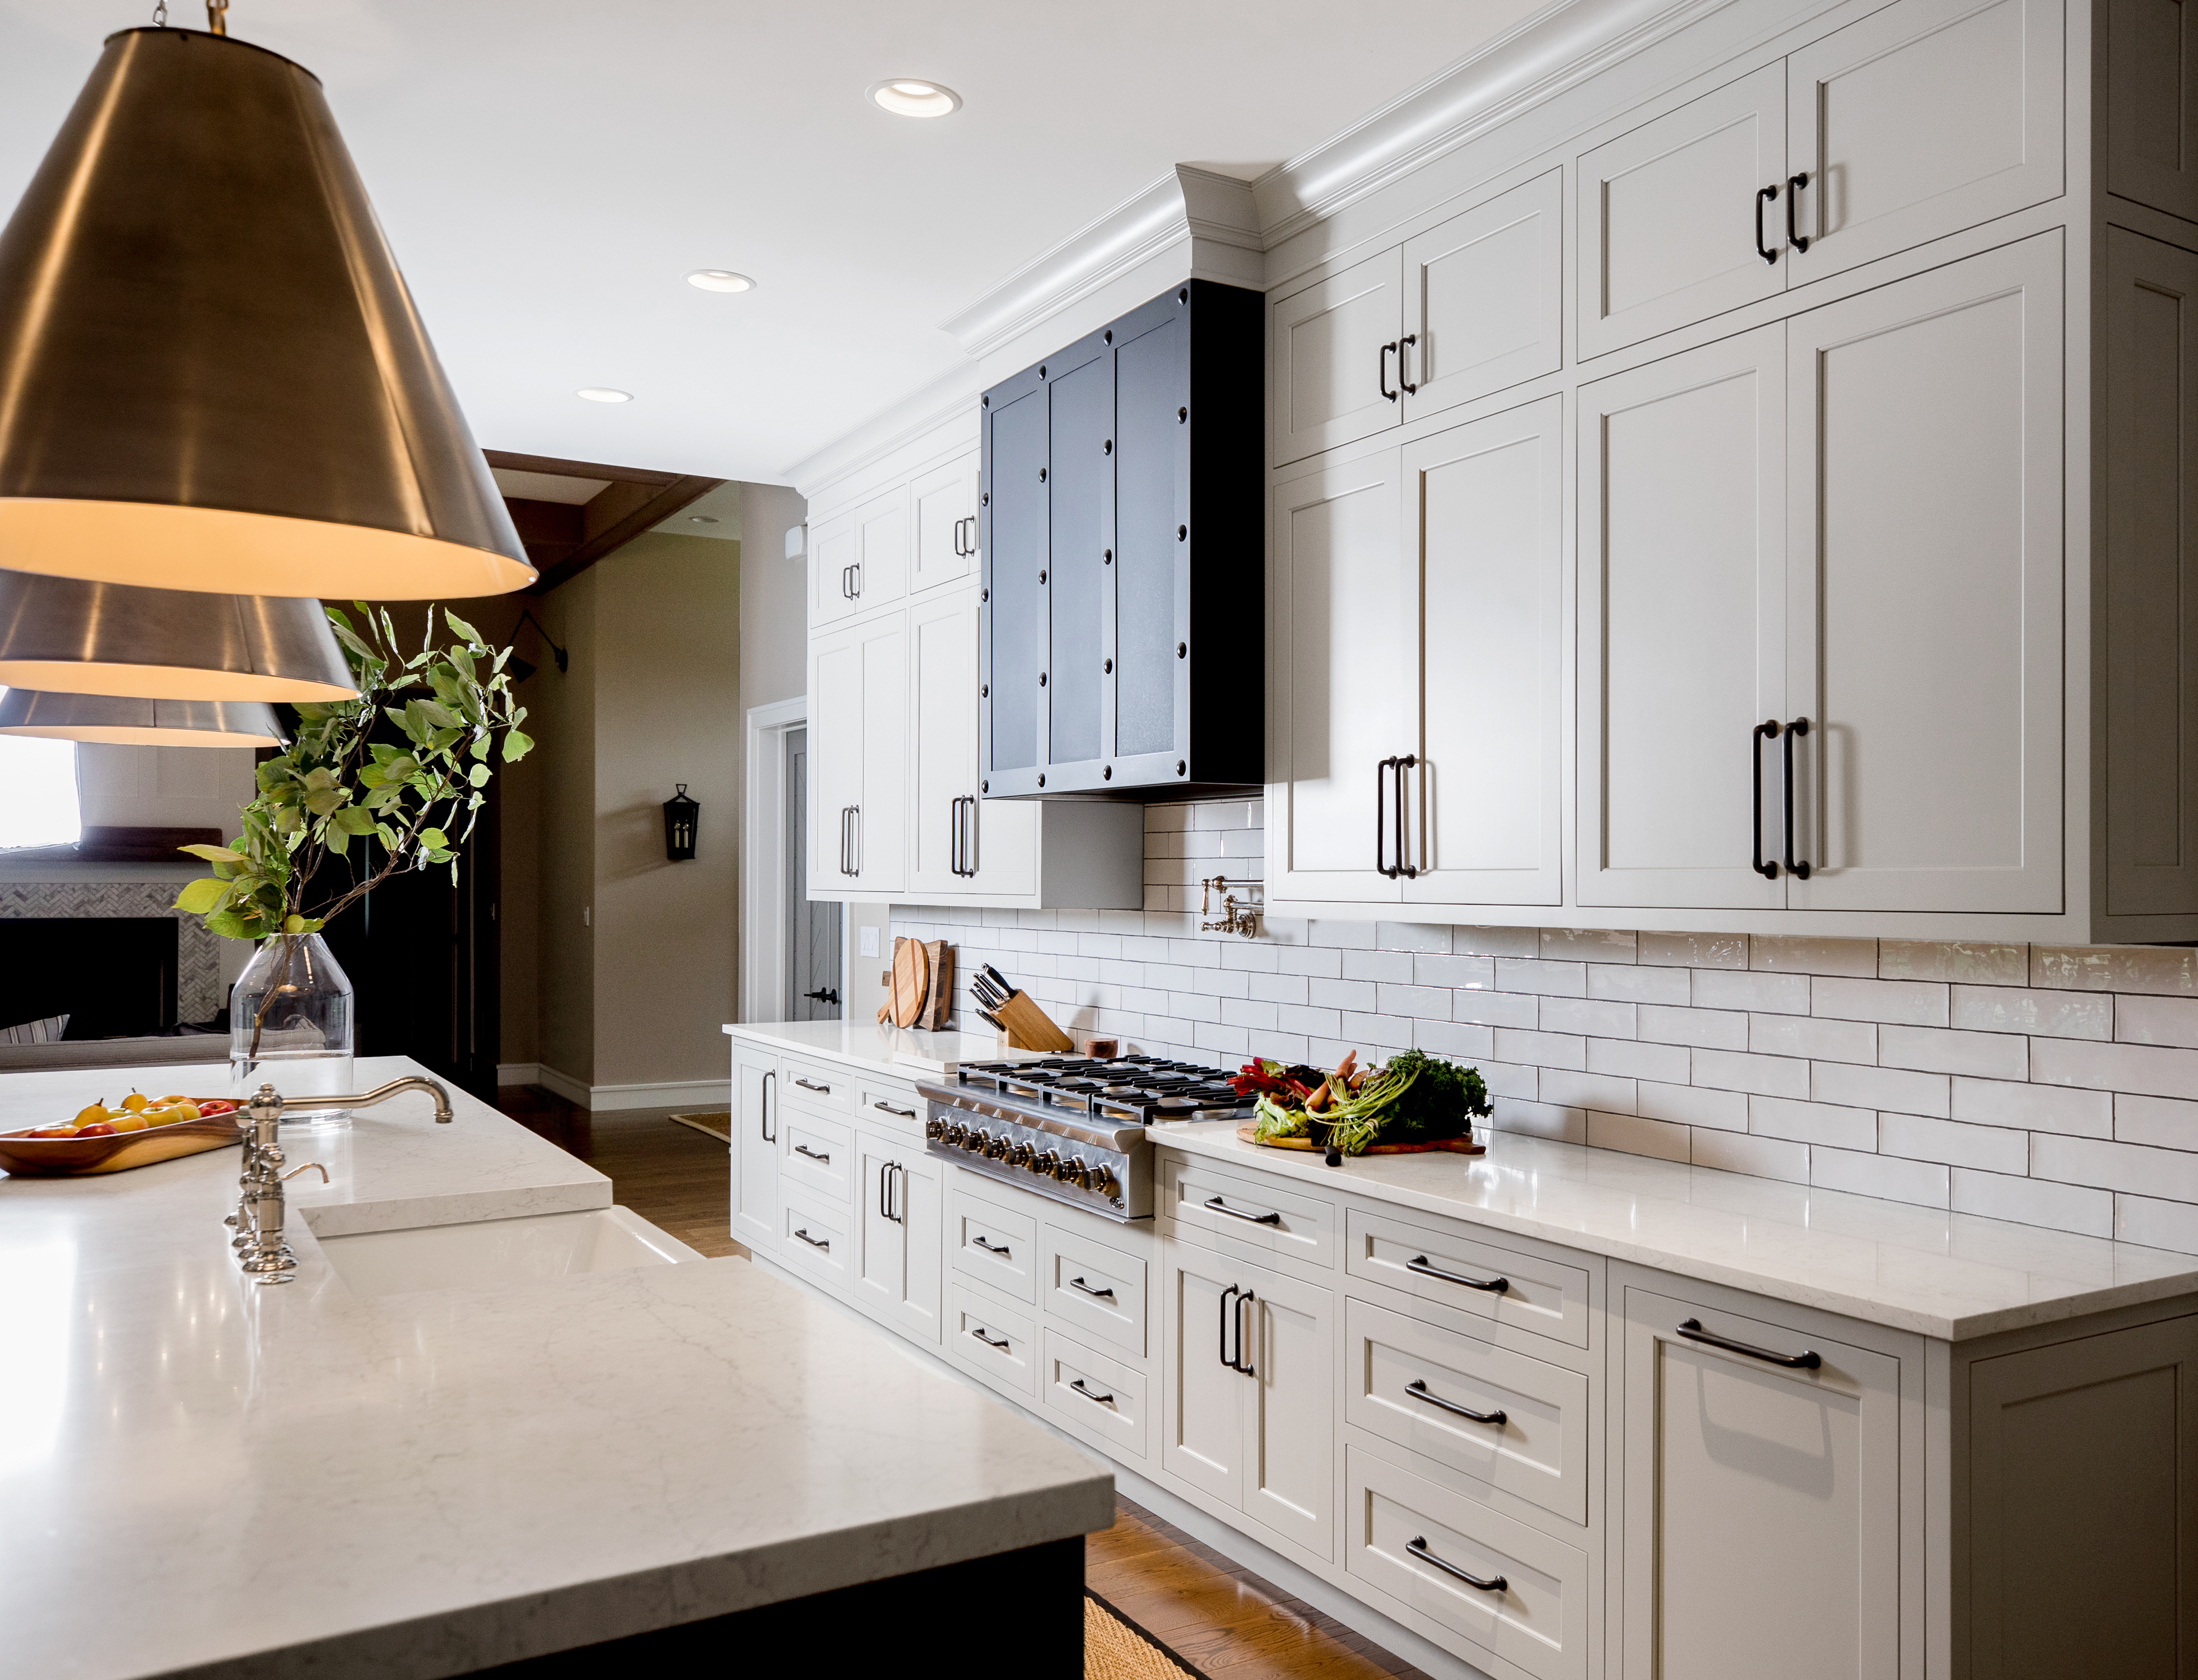 An elegant modern farmhouse kitchen design with sleek framed kitchen cabinets with inset cabinet door construction. The kitchen cabinetry is shown in an off-white painted finish with a classic shaker inset door style.